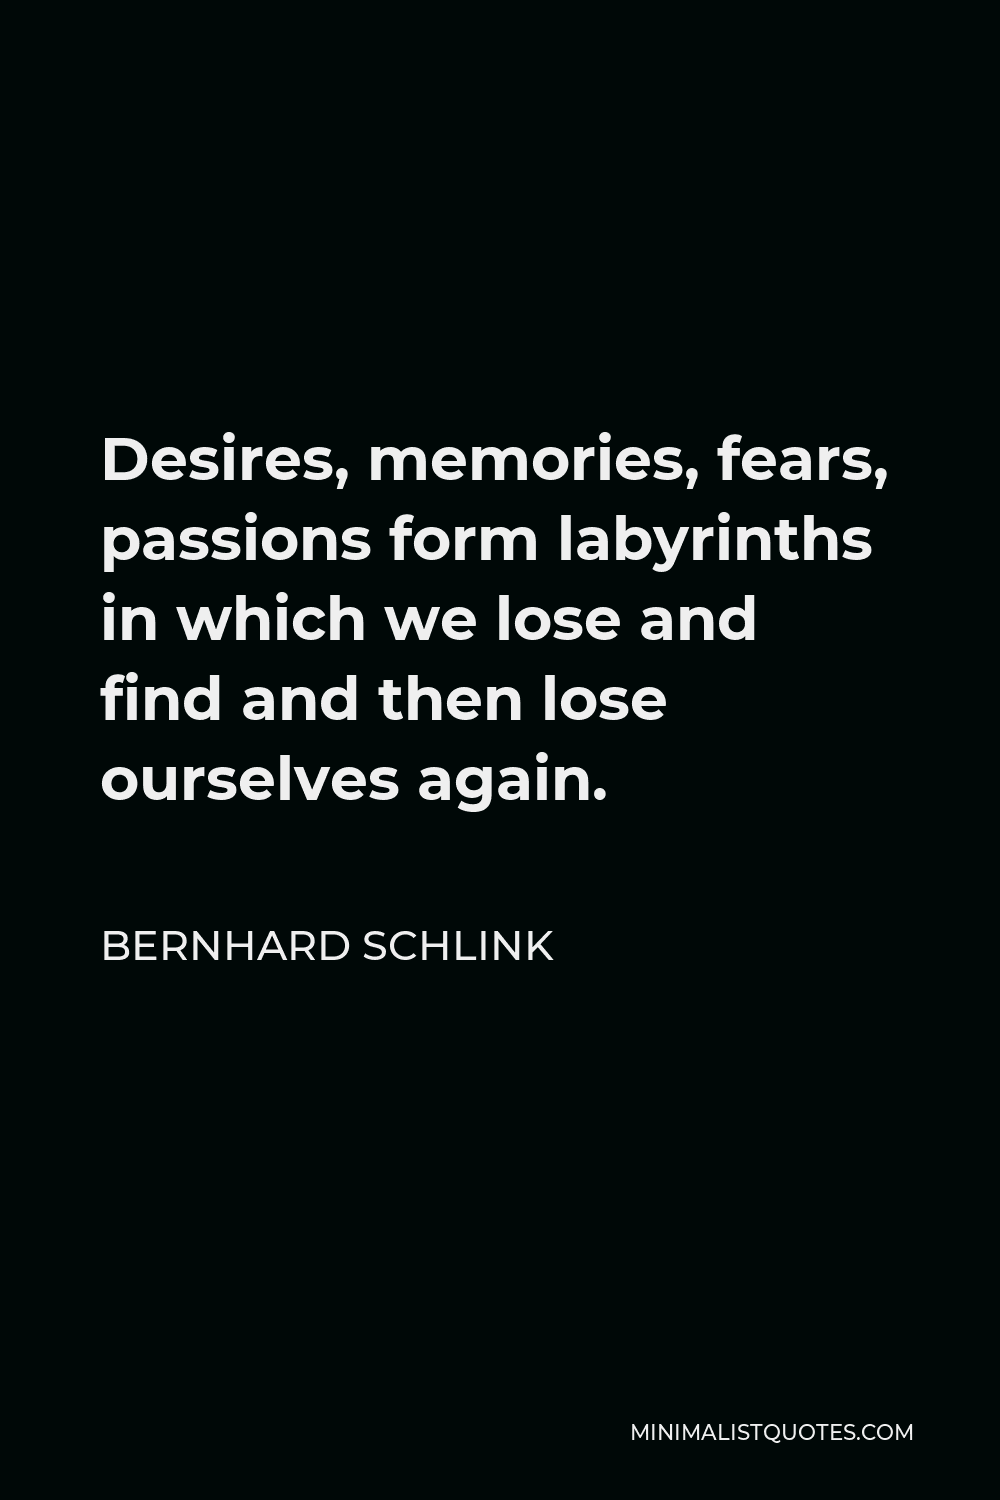 Bernhard Schlink Quote - Desires, memories, fears, passions form labyrinths in which we lose and find and then lose ourselves again.